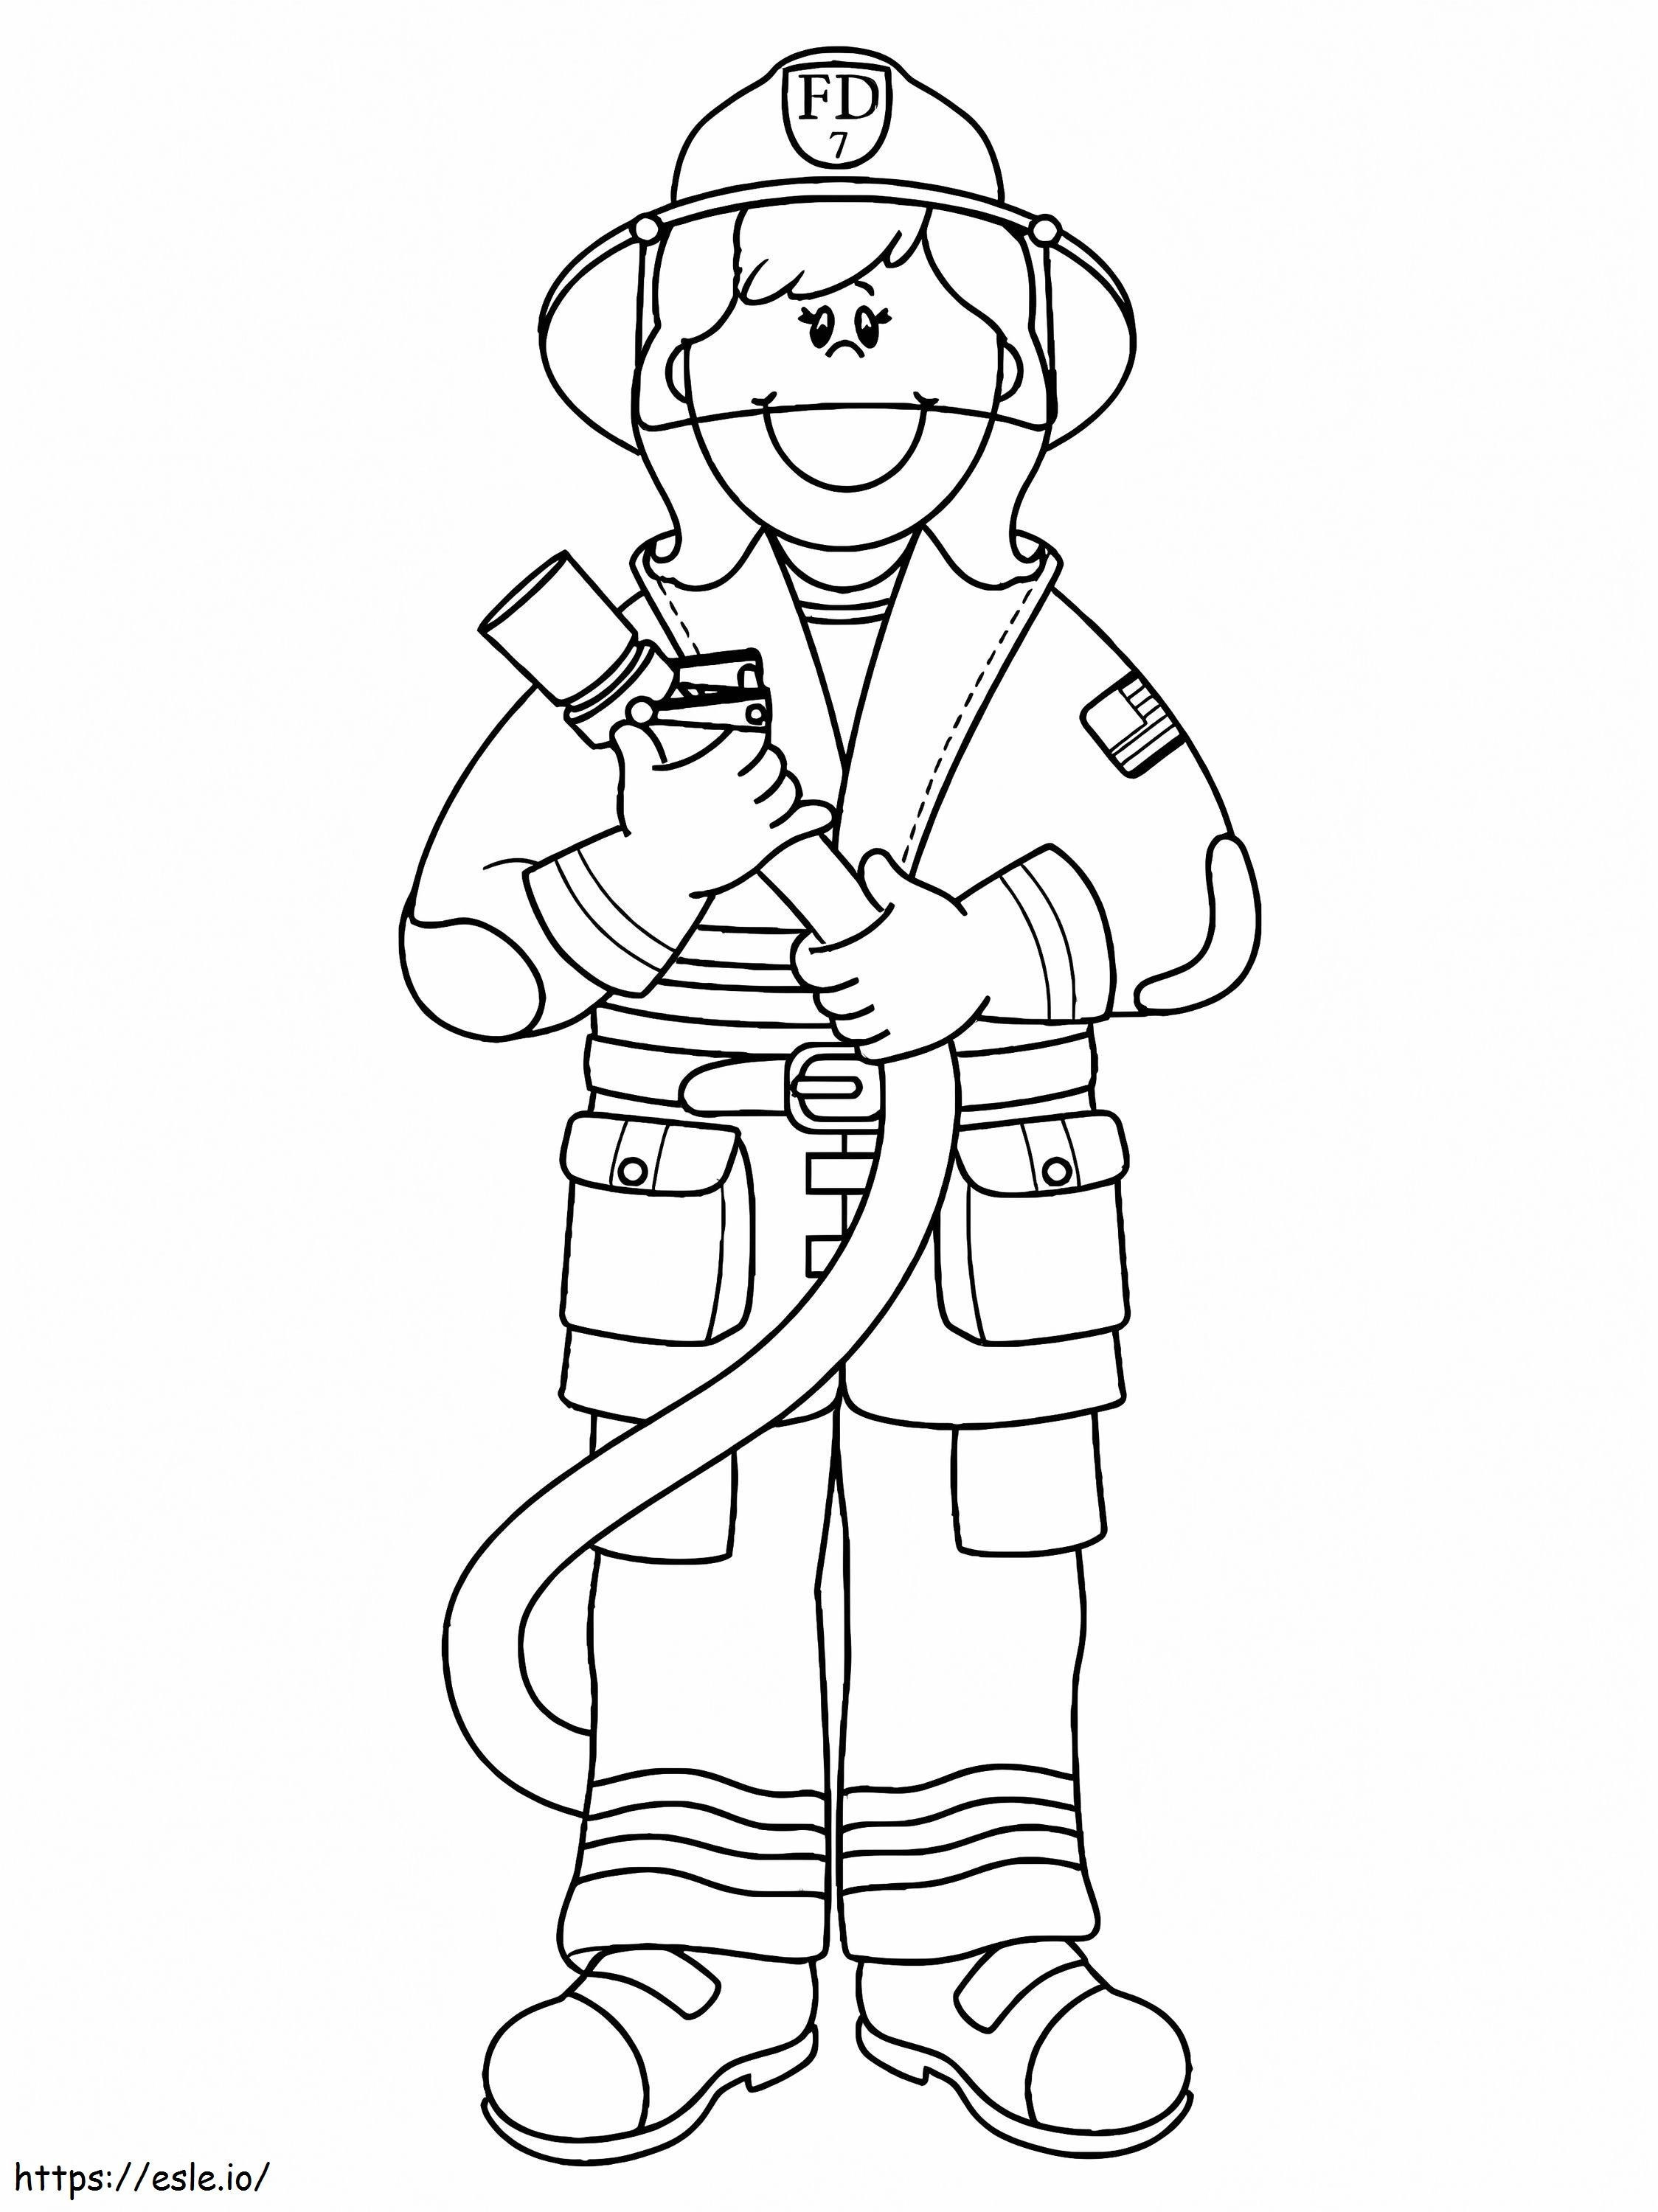 Happy Firefighter coloring page